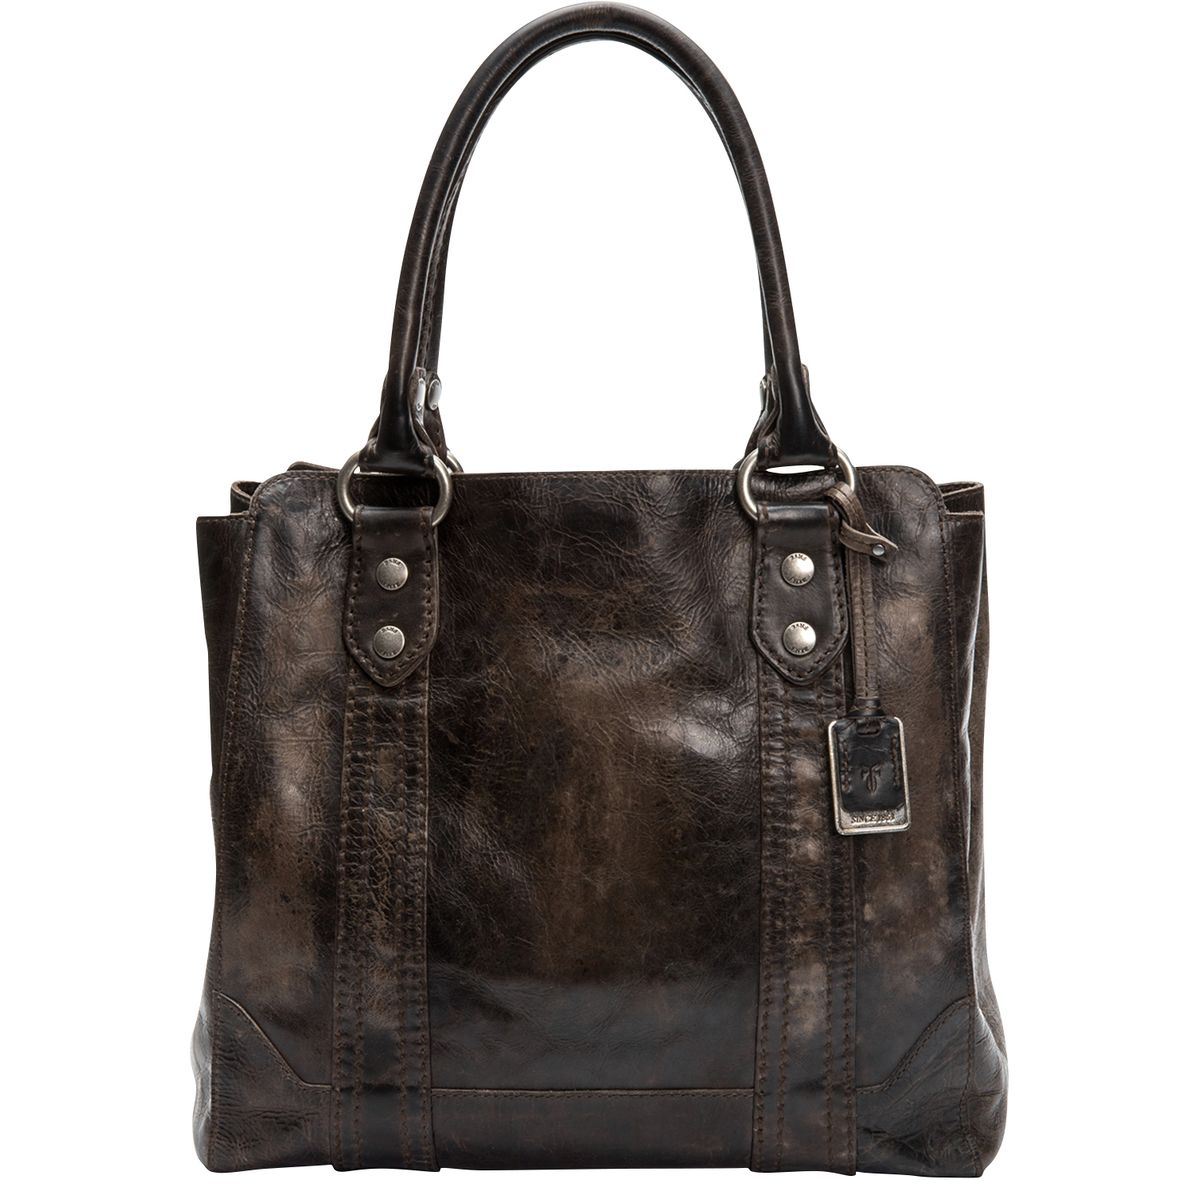 Frye Handbags | Outlet Factory Store